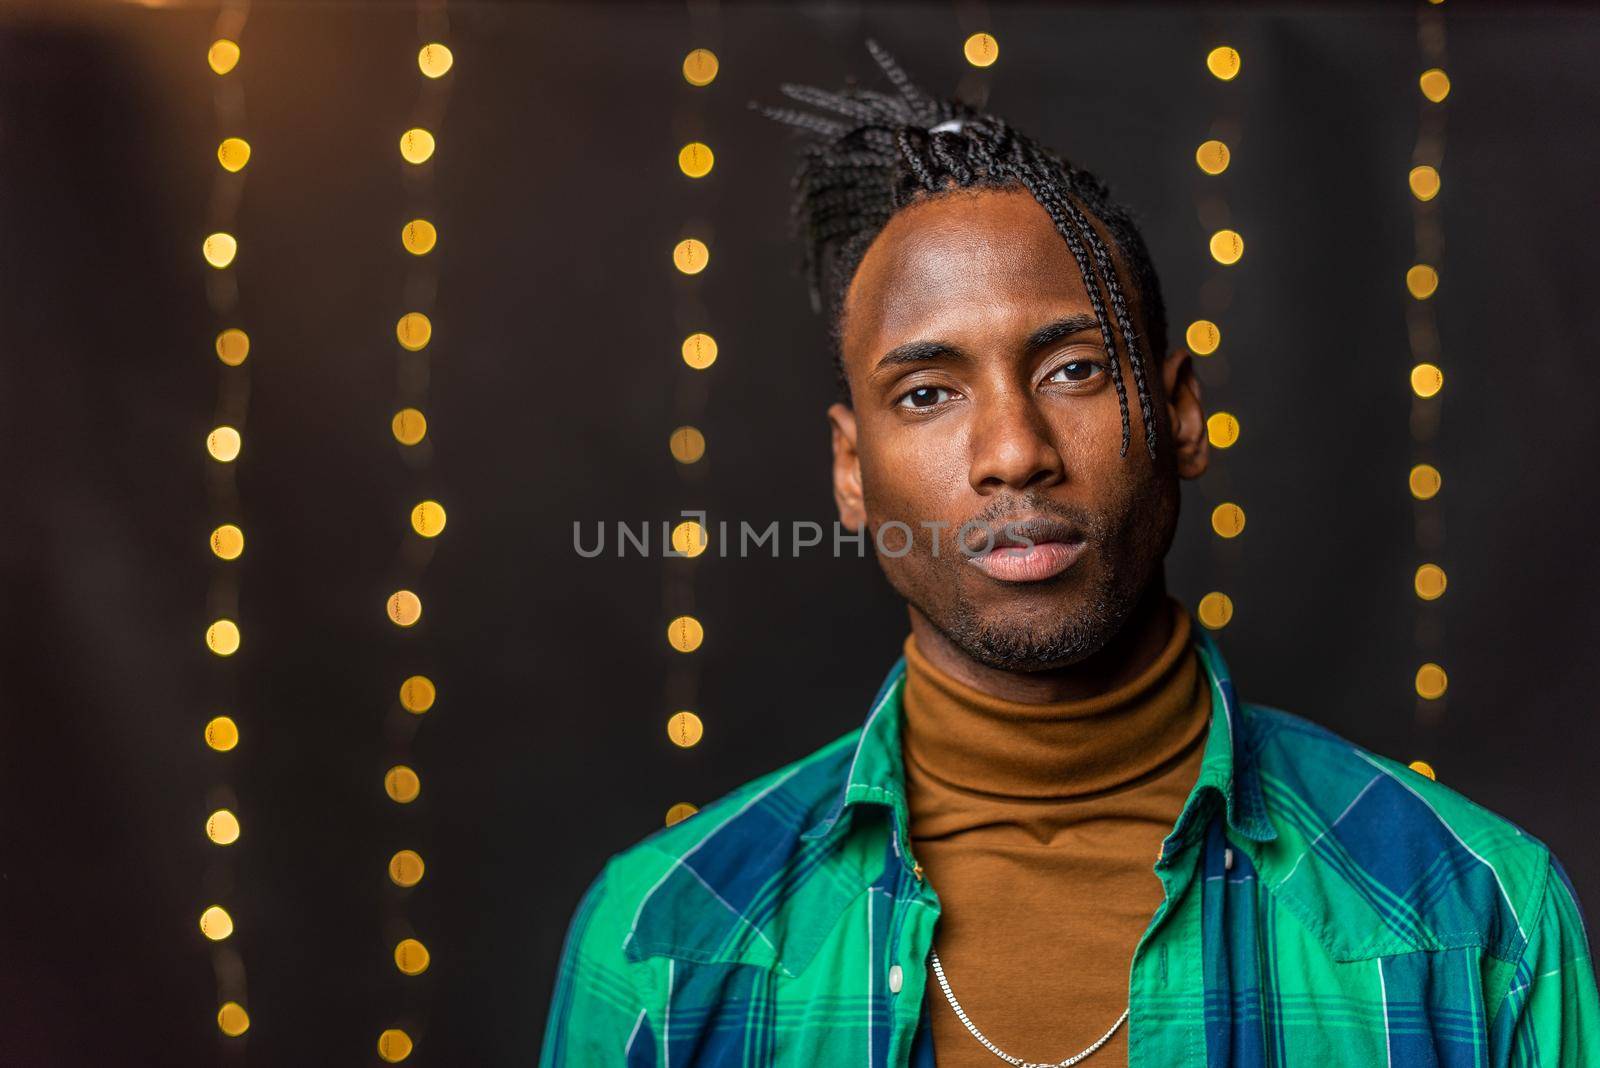 Portrait of a serious young African American with braids looking at the camera with a blurred light background.